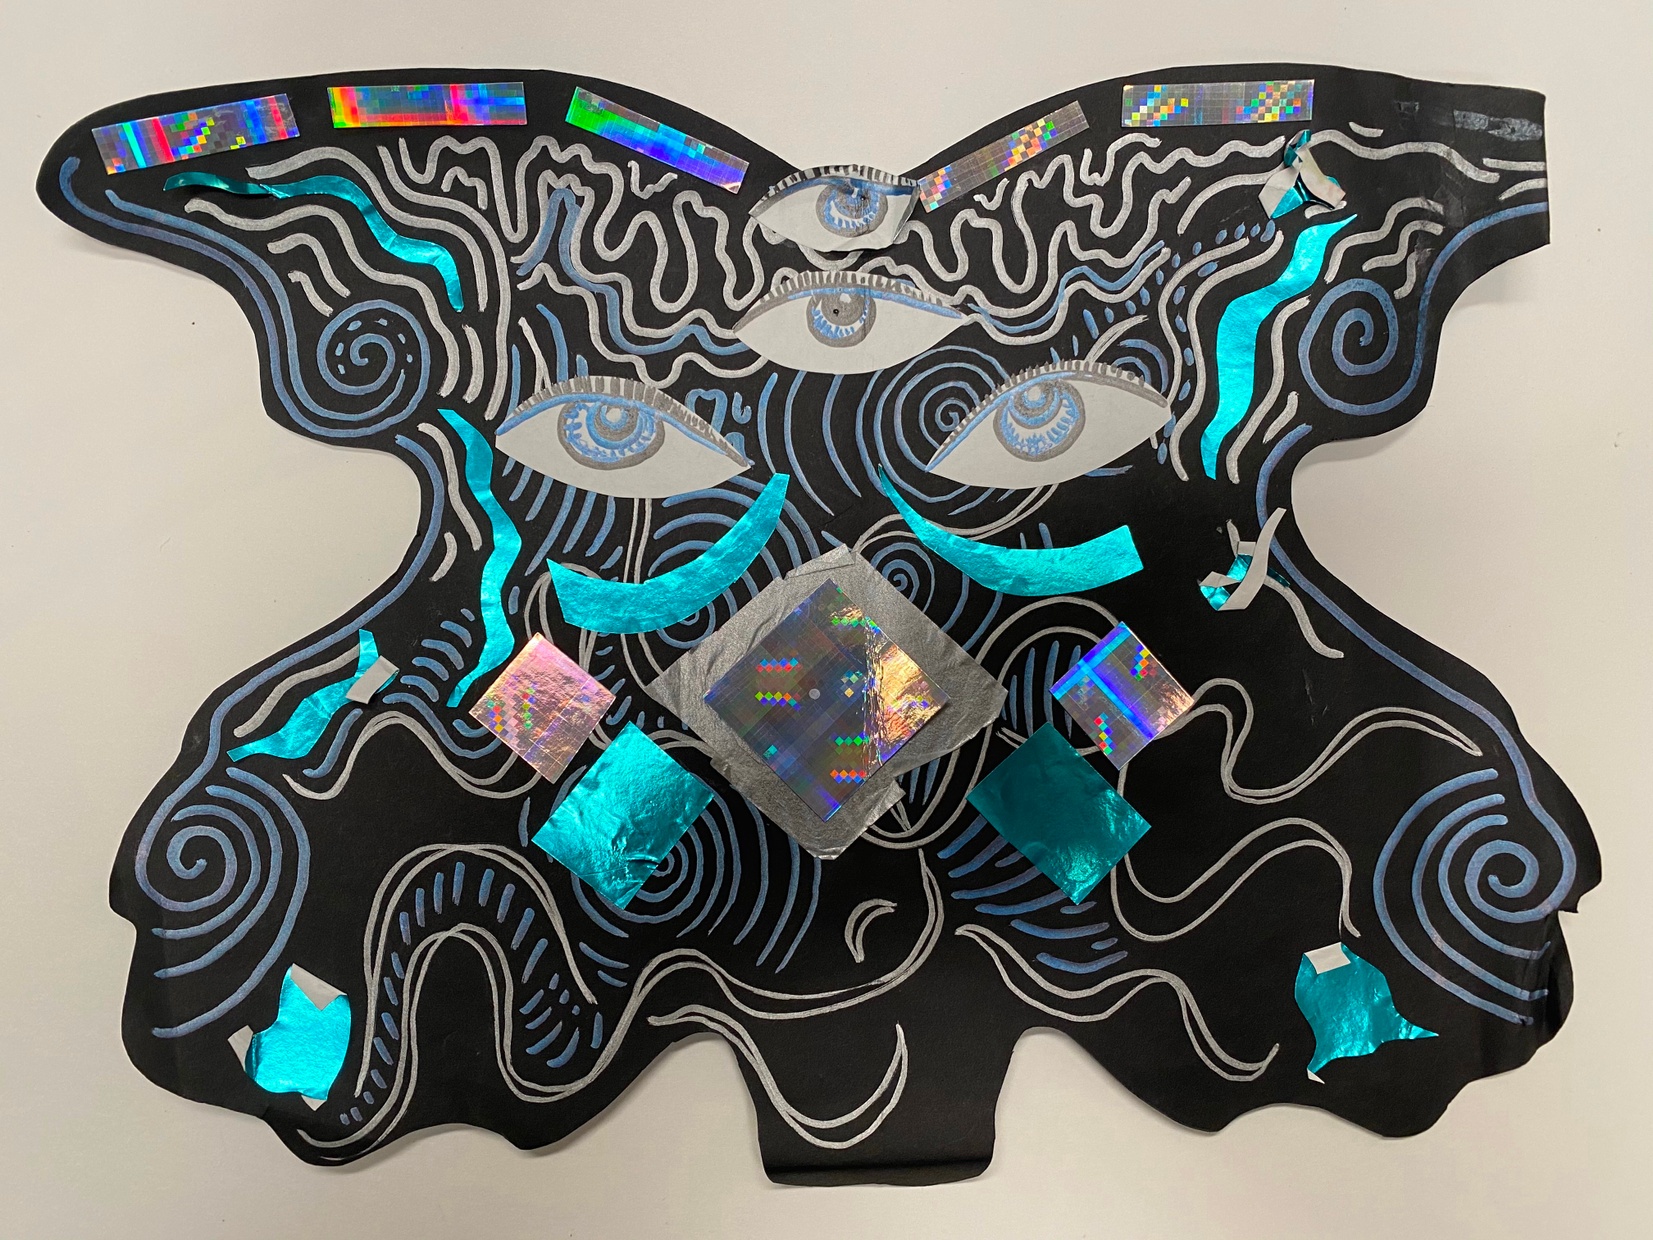 A black abstract symmetrical form with multiple eyes and pops of blue and metallic colors.